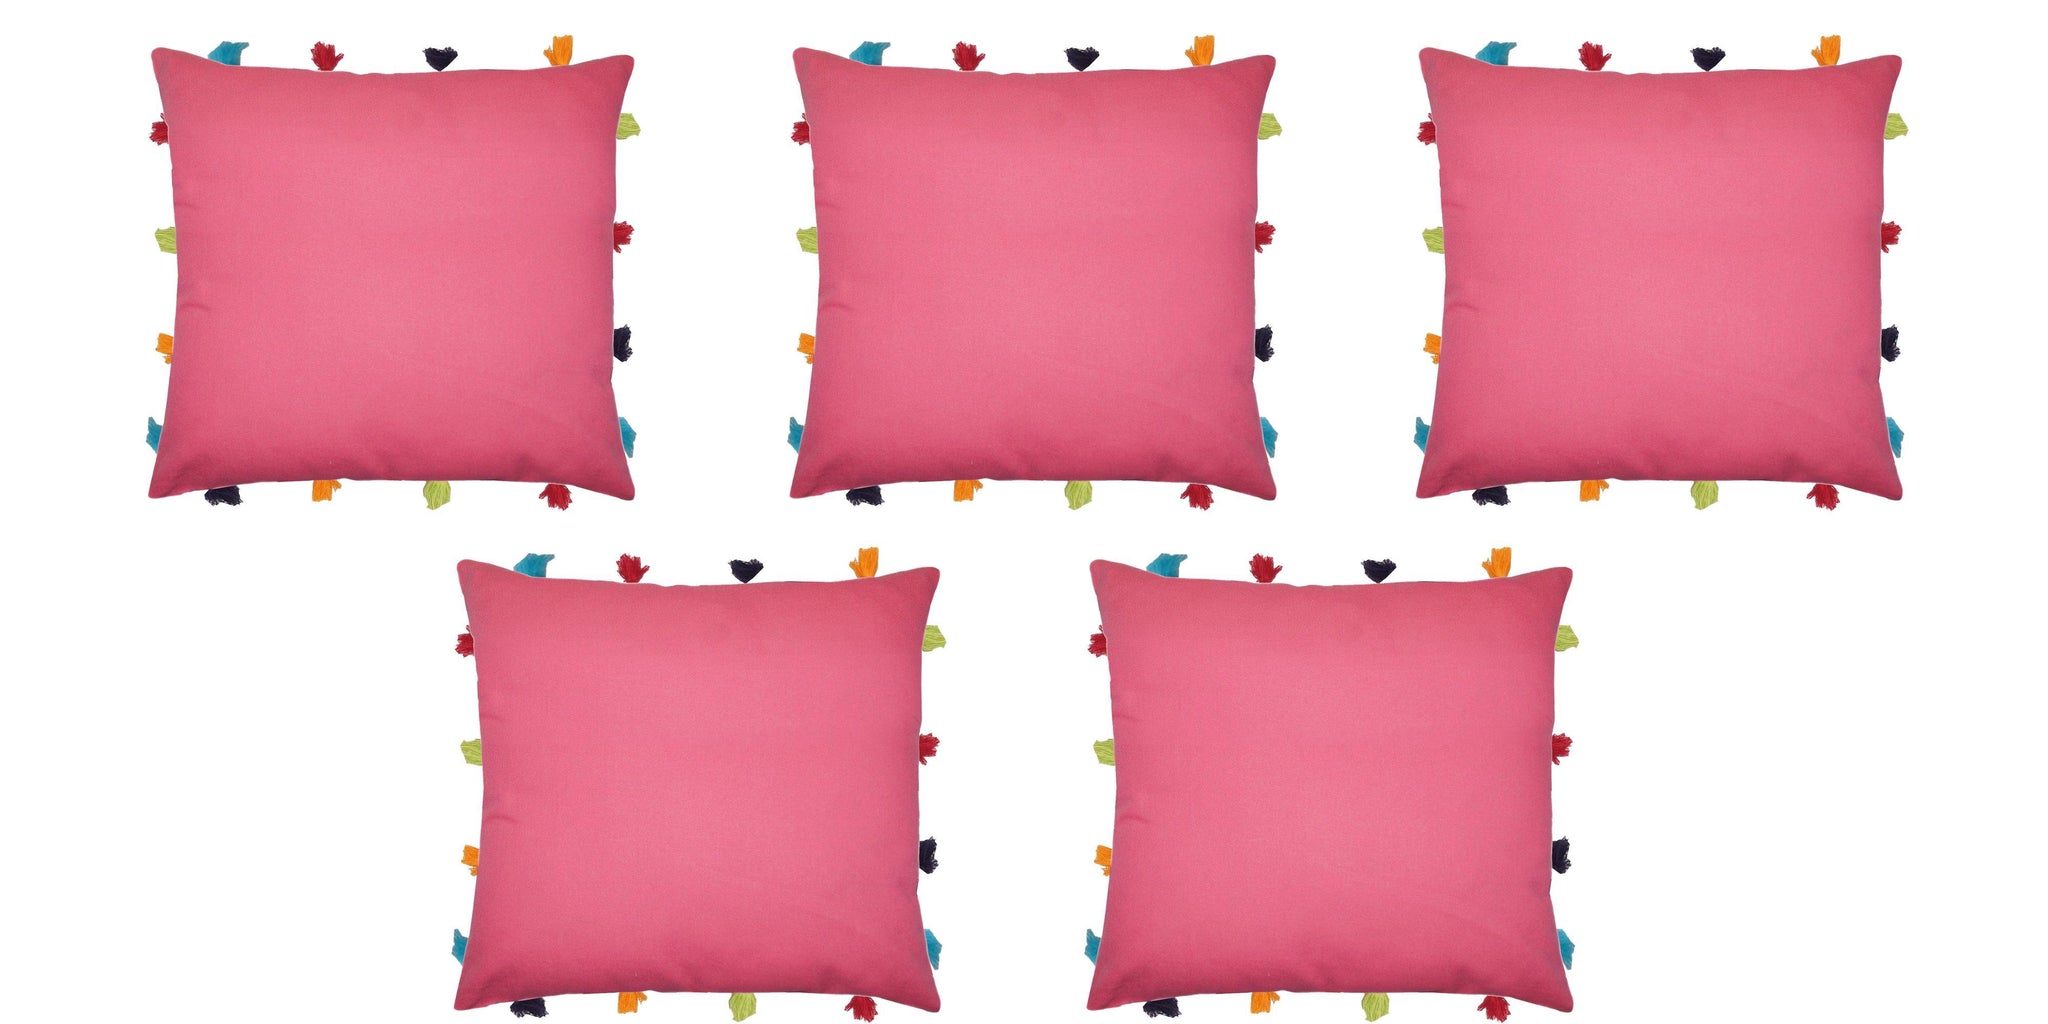 Lushomes Rasberry Cushion Cover with Colorful tassels (5 pcs, 14 x 14”) - Lushomes